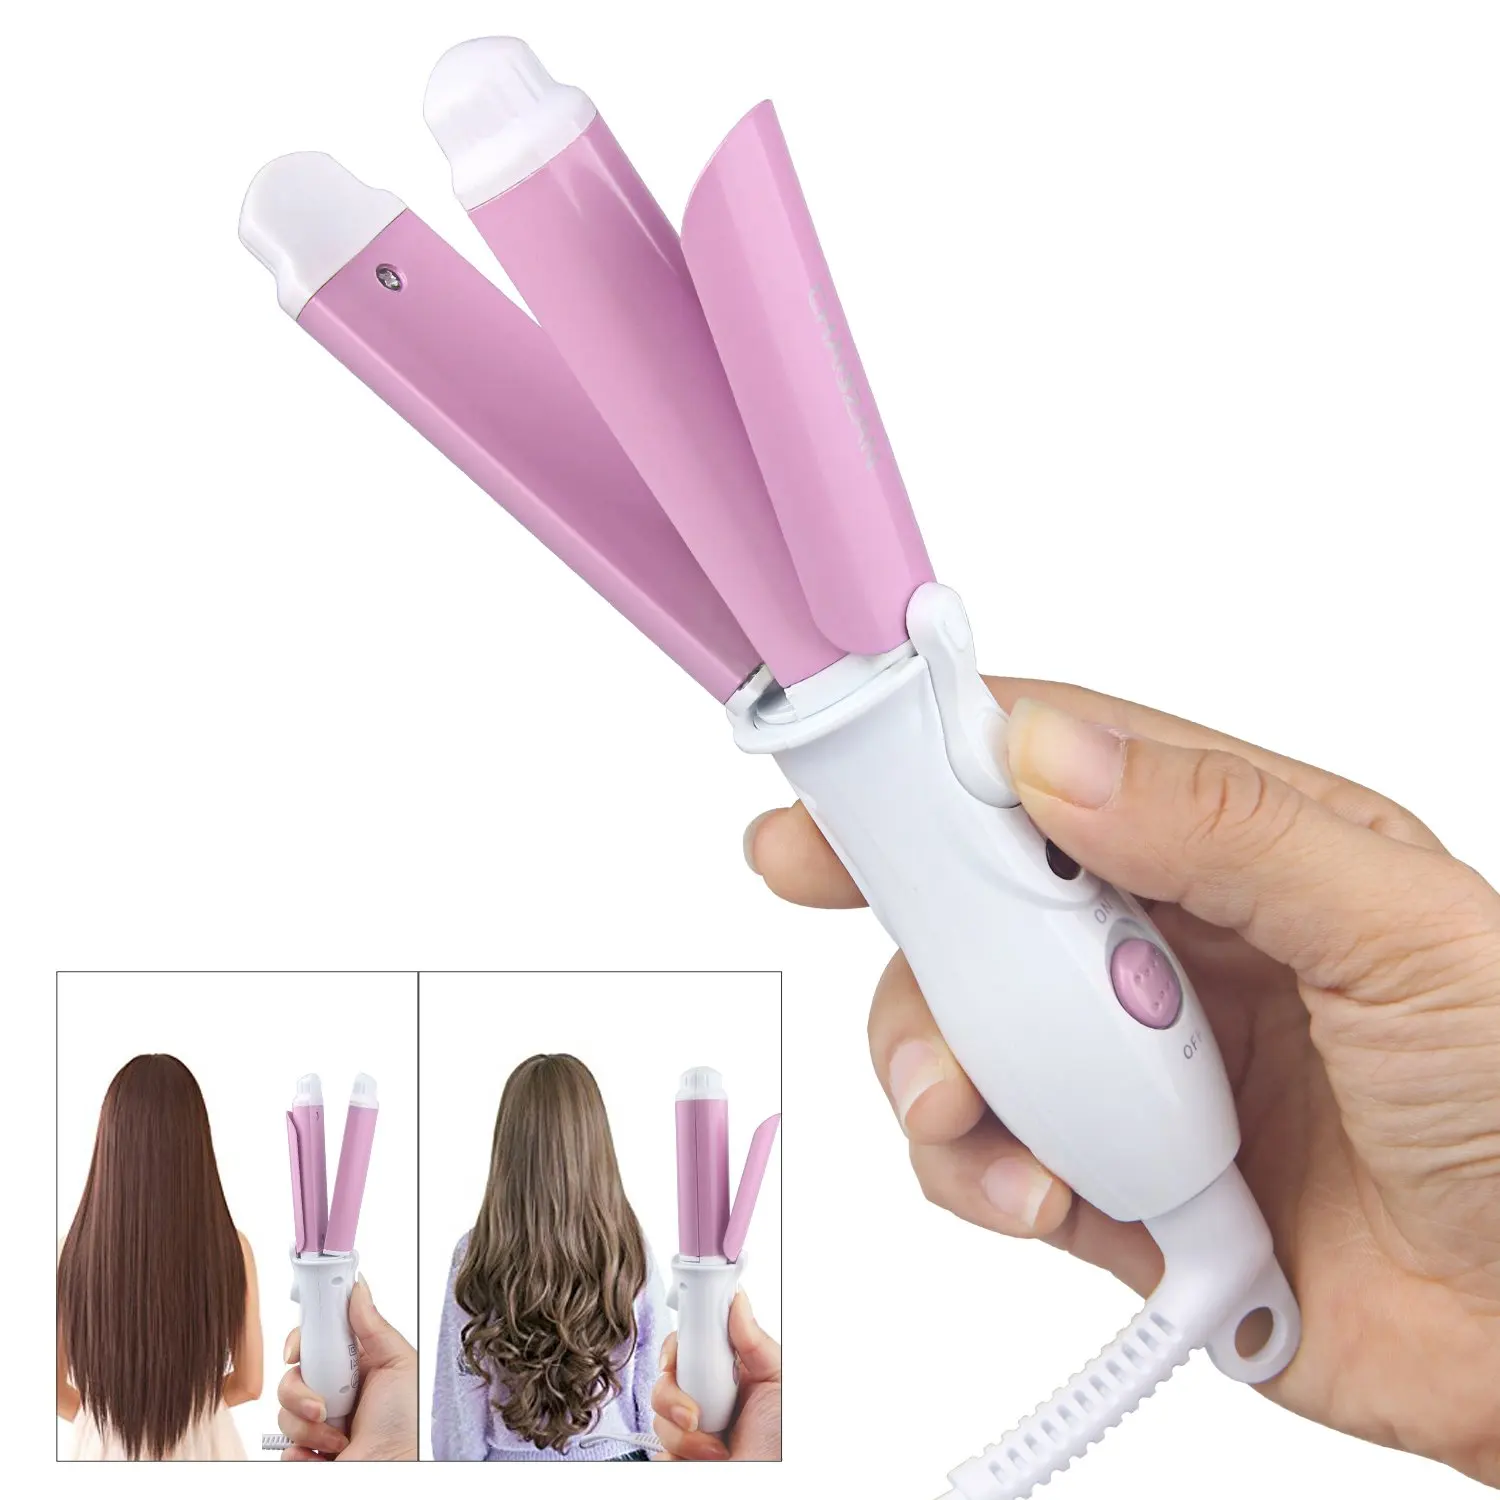 Cheap Pink Hair Curling Wand, find Pink Hair Curling Wand deals on line